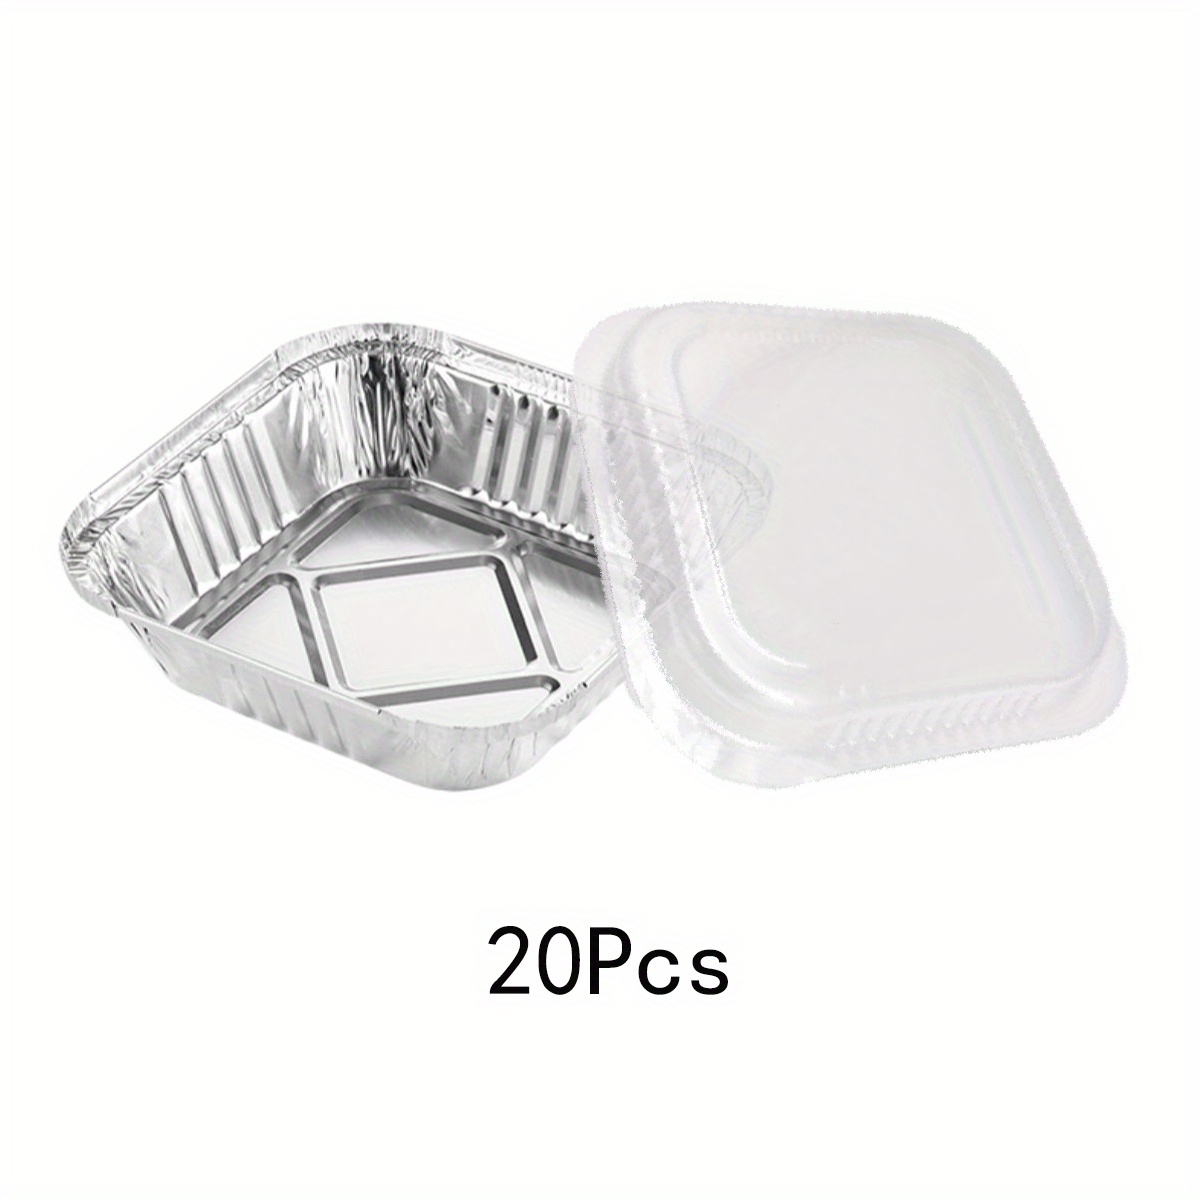 Dropship 8x8 Disposable Aluminum Foil Meal Prep Cookware Square Pans,  Oven, Toaster, Grill, Cooking, Roasting, Broiling, Baking, Event, Take Out,  Restaurant to Sell Online at a Lower Price